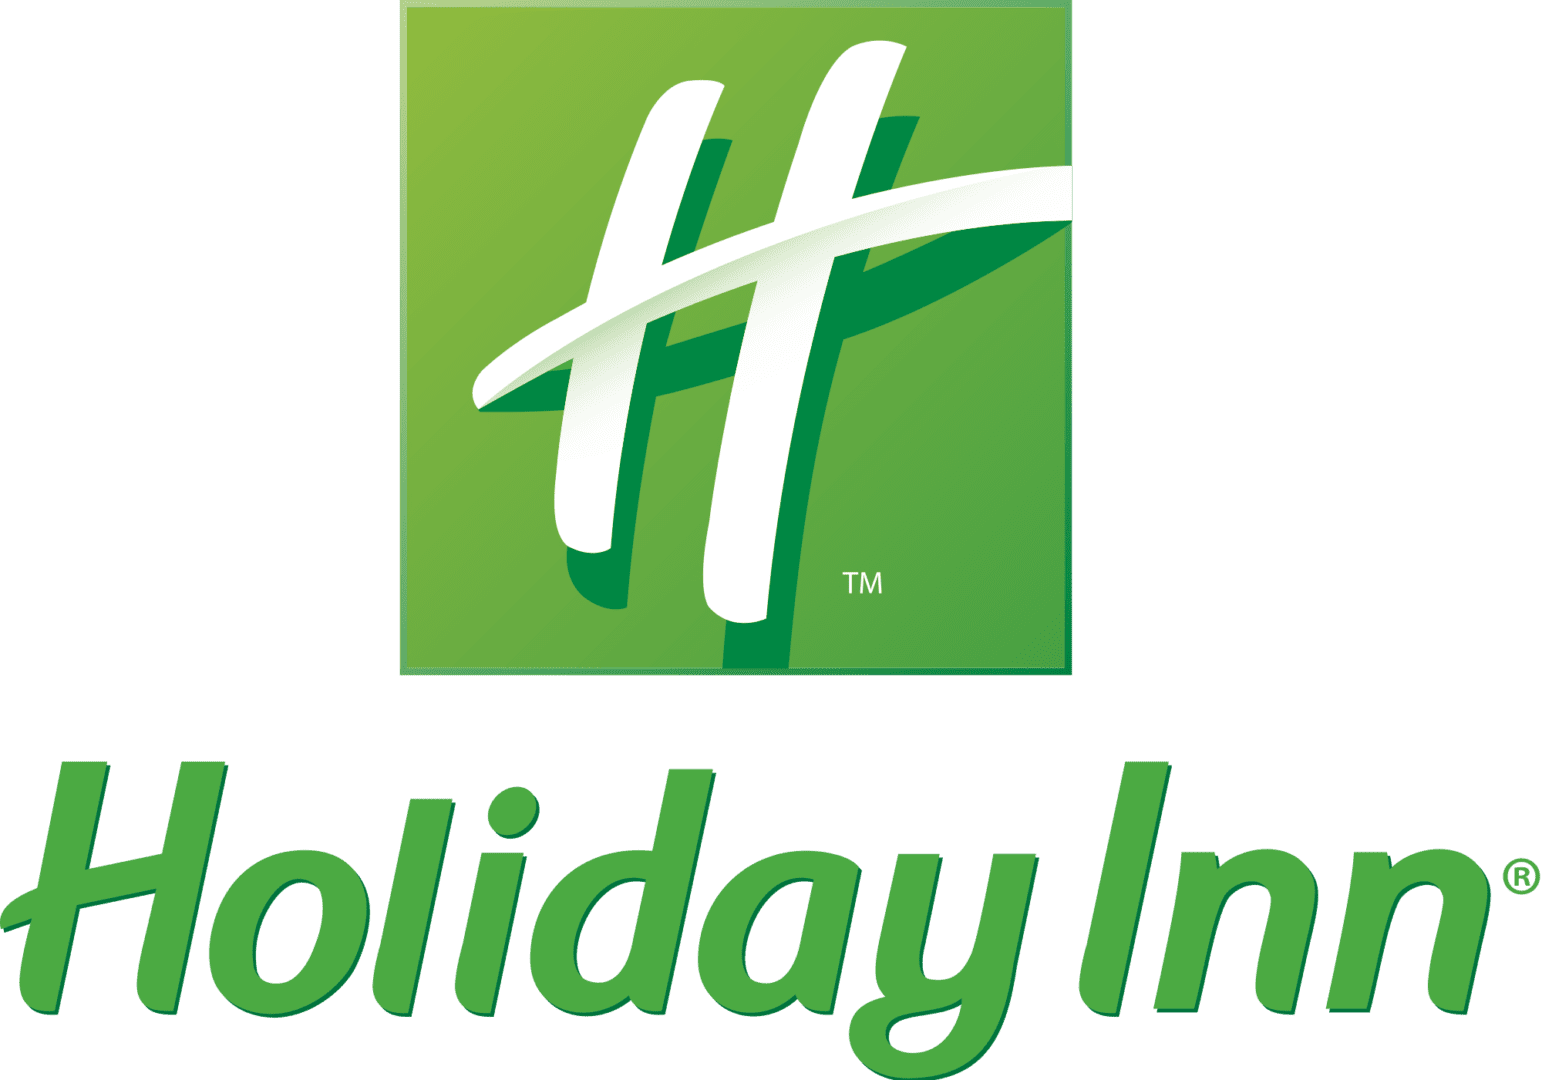 Logo of holiday inn featuring a stylized white "h" on a green background with the text "holiday inn" below it.